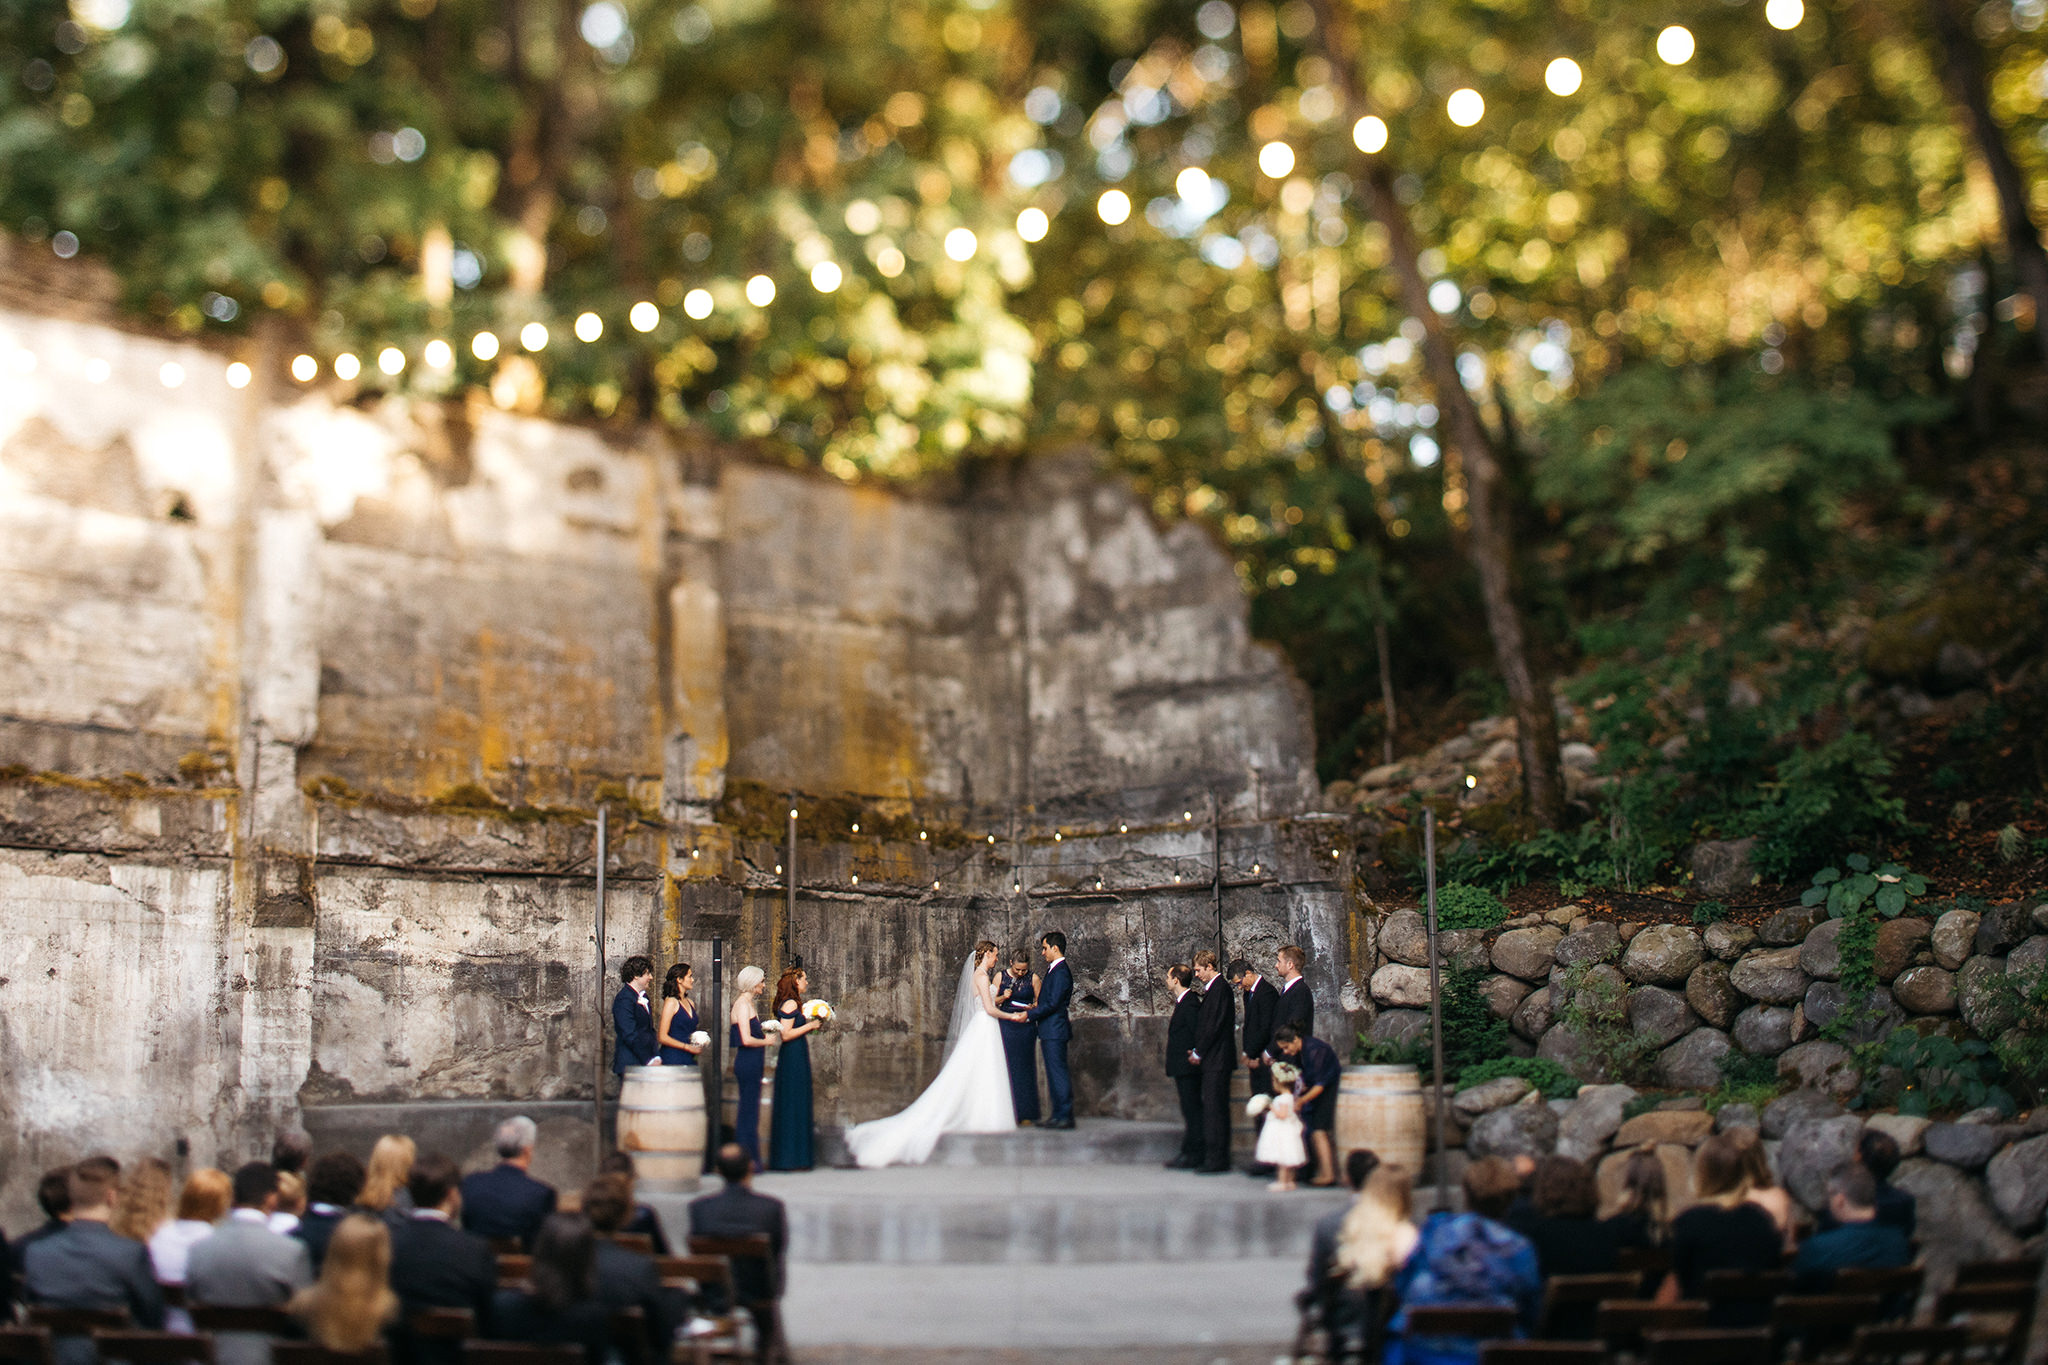 Wedding ceremony at The Ruins in Hood River, Oregon